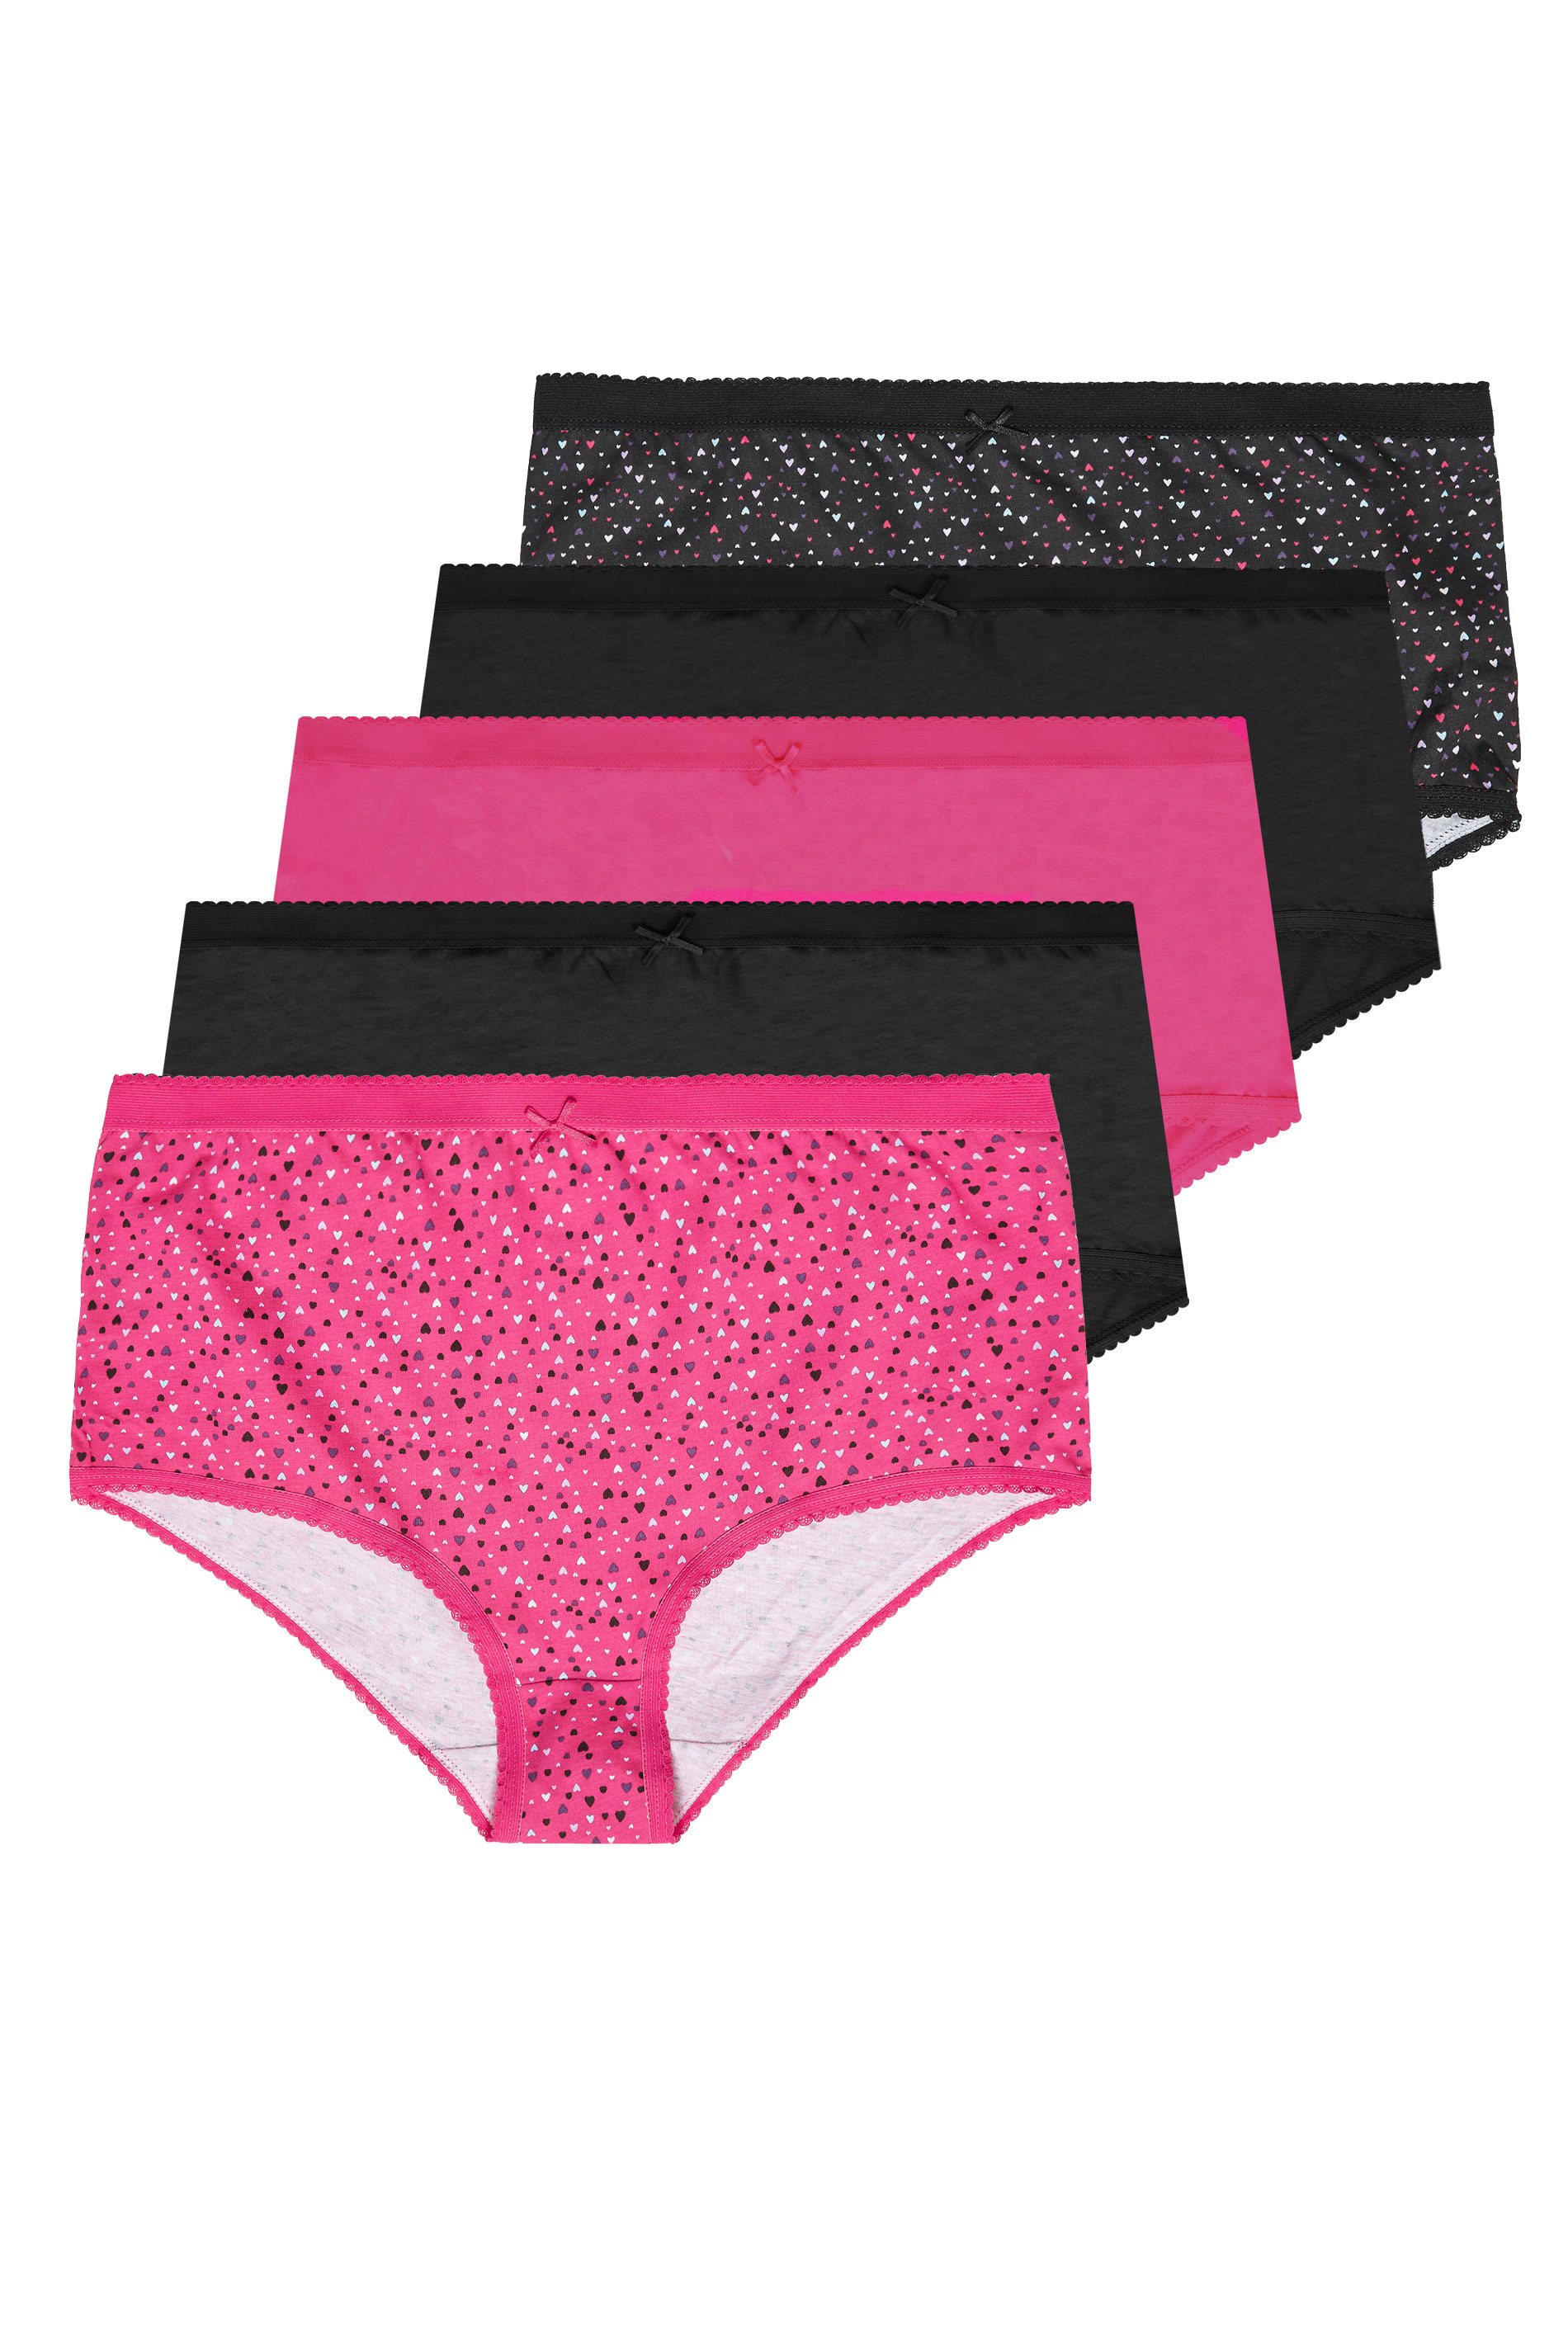 5 PACK Pink Multi Heart Print Full Briefs | Yours Clothing